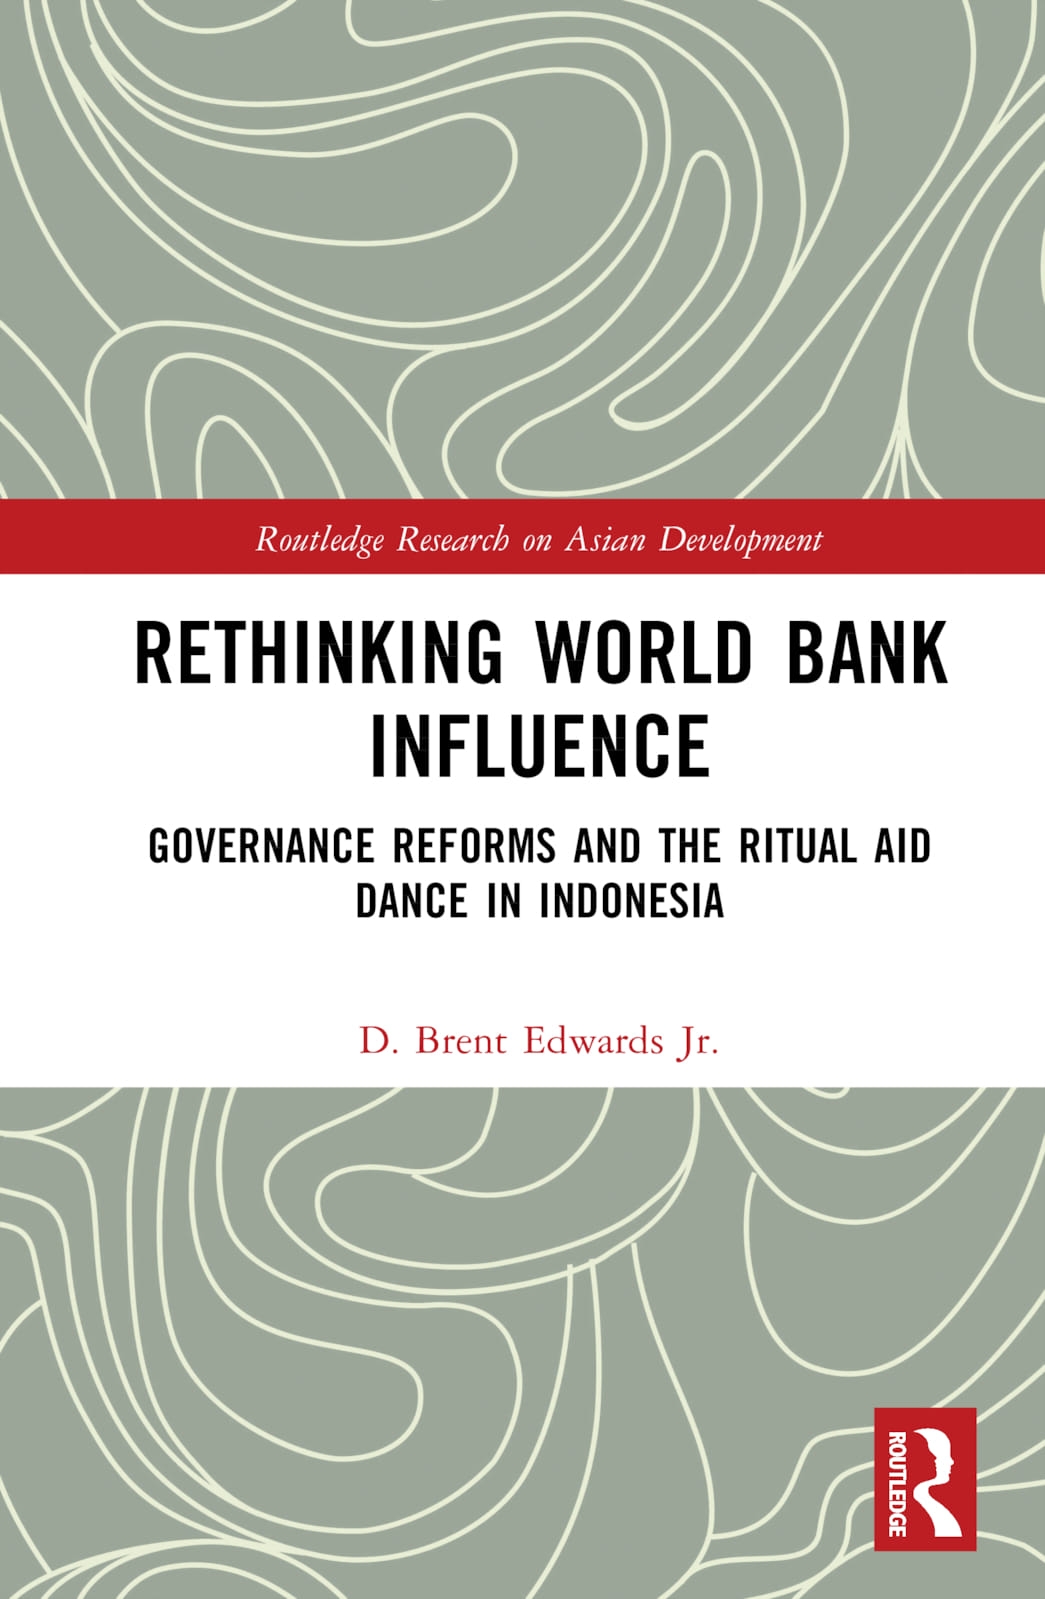 Rethinking World Bank Influence: Governance Reforms and the Ritual Aid Dance in Indonesia